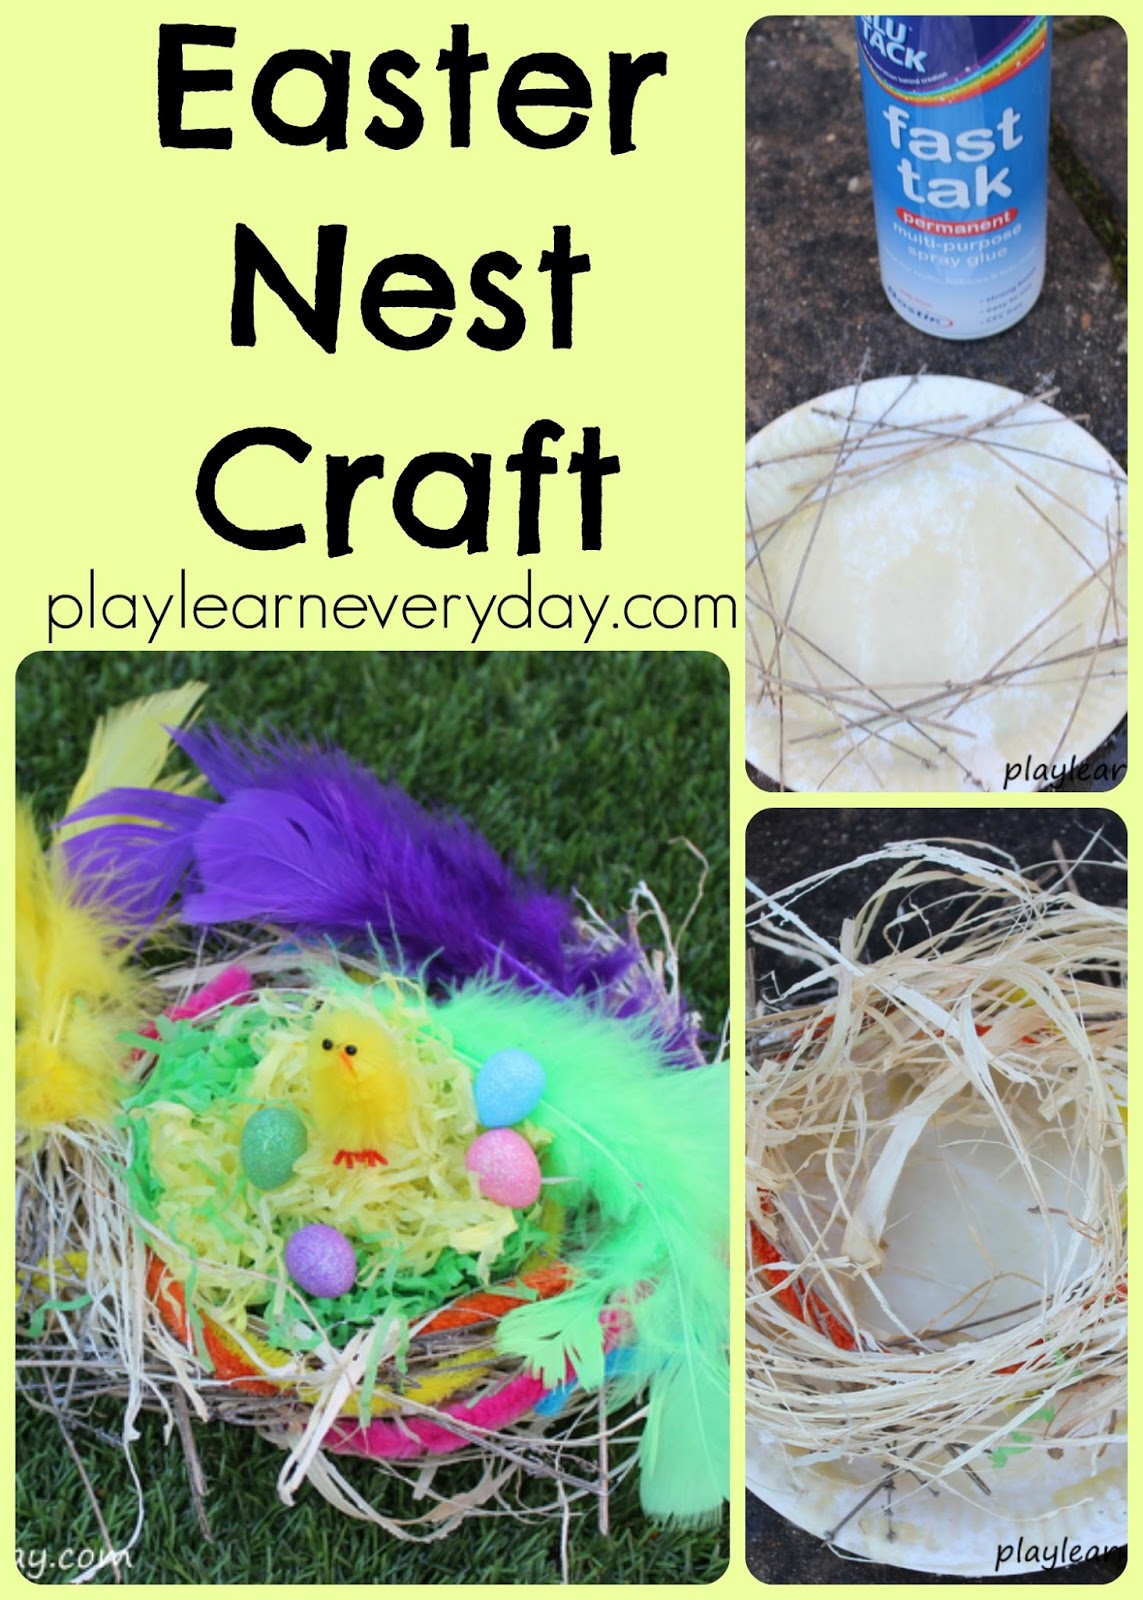 Easter Nest Craft - Play and Learn Every Day